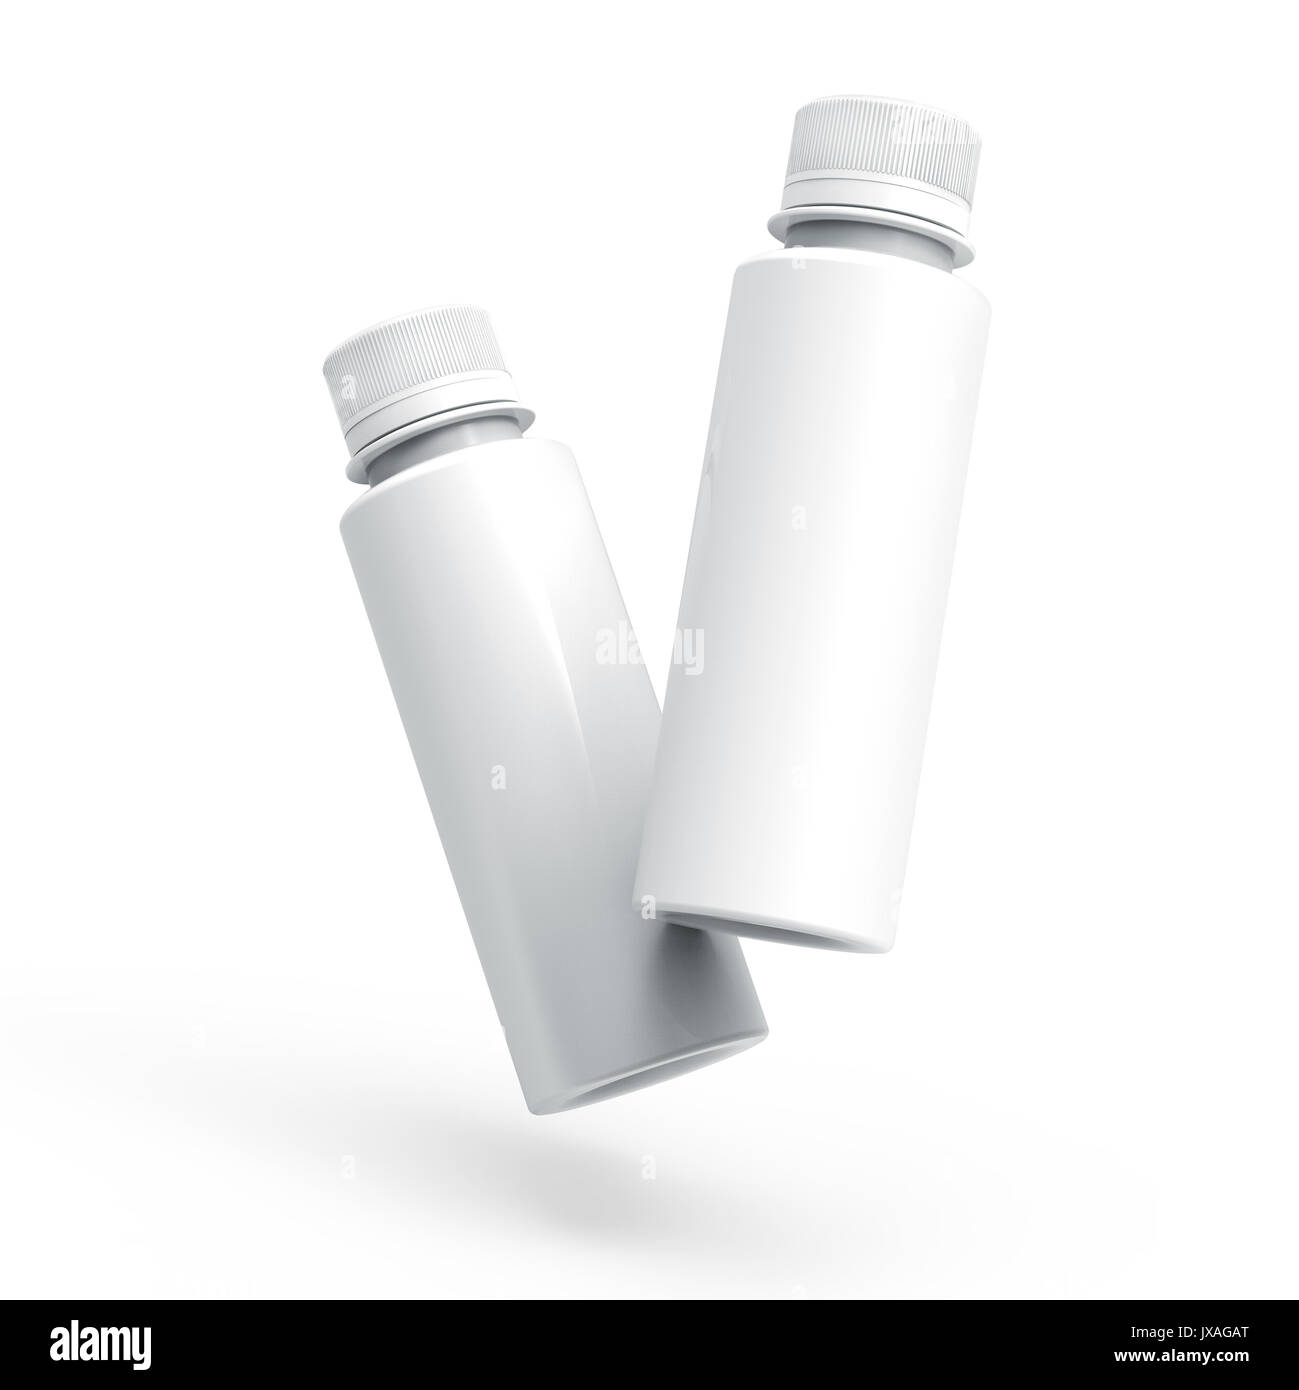 Plastic bottle for drinks, blank bottle mockup template in 3d rendering isolated on white for design uses, two bottles collection Stock Photo